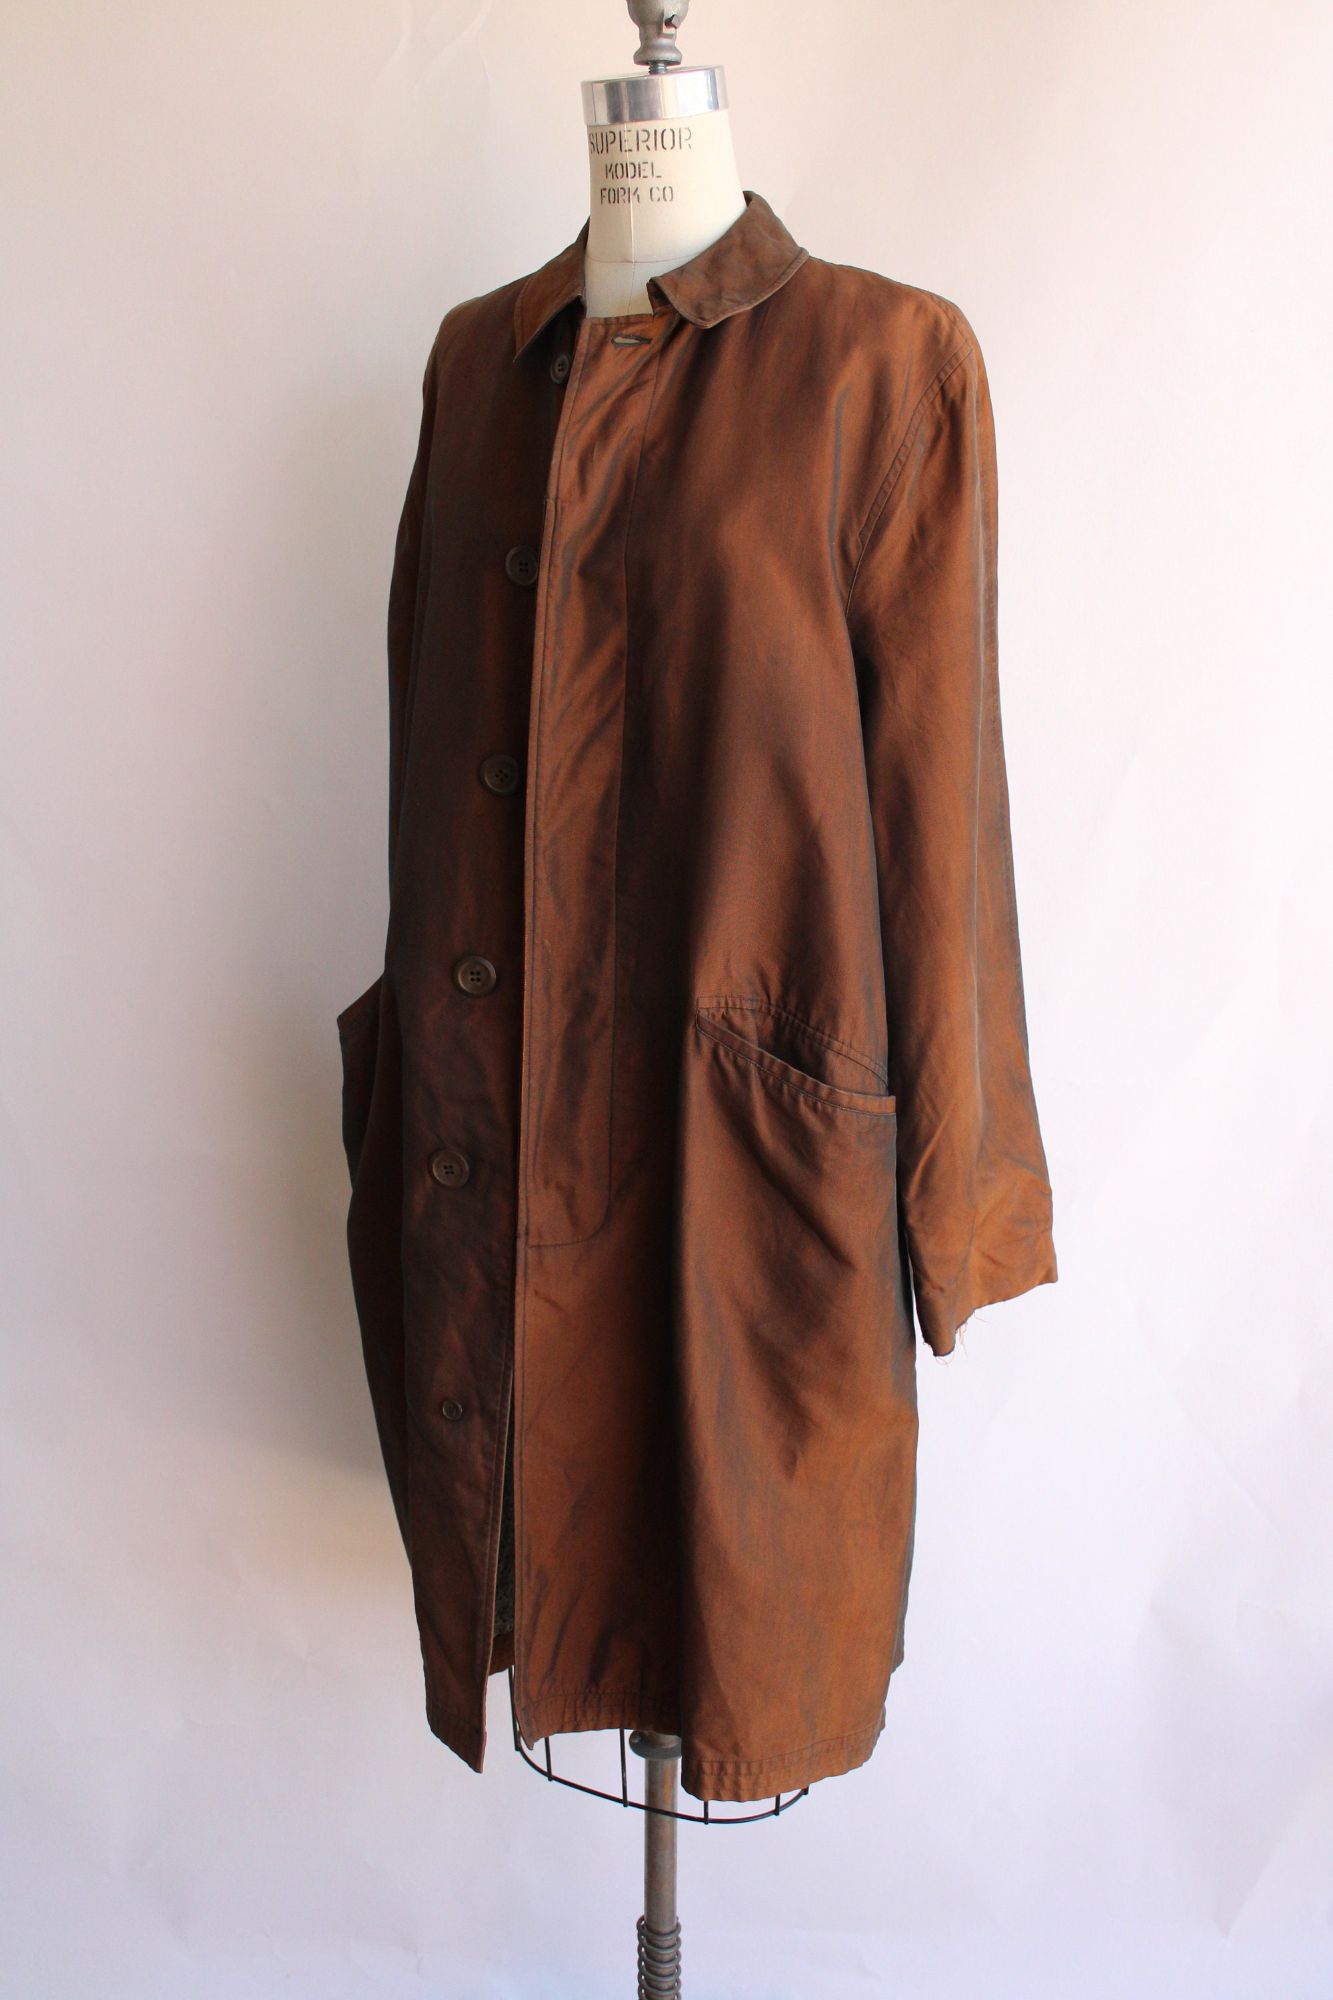 Vintage 1970s 1980s Briarcliff Brown All Weather Rain Jacket